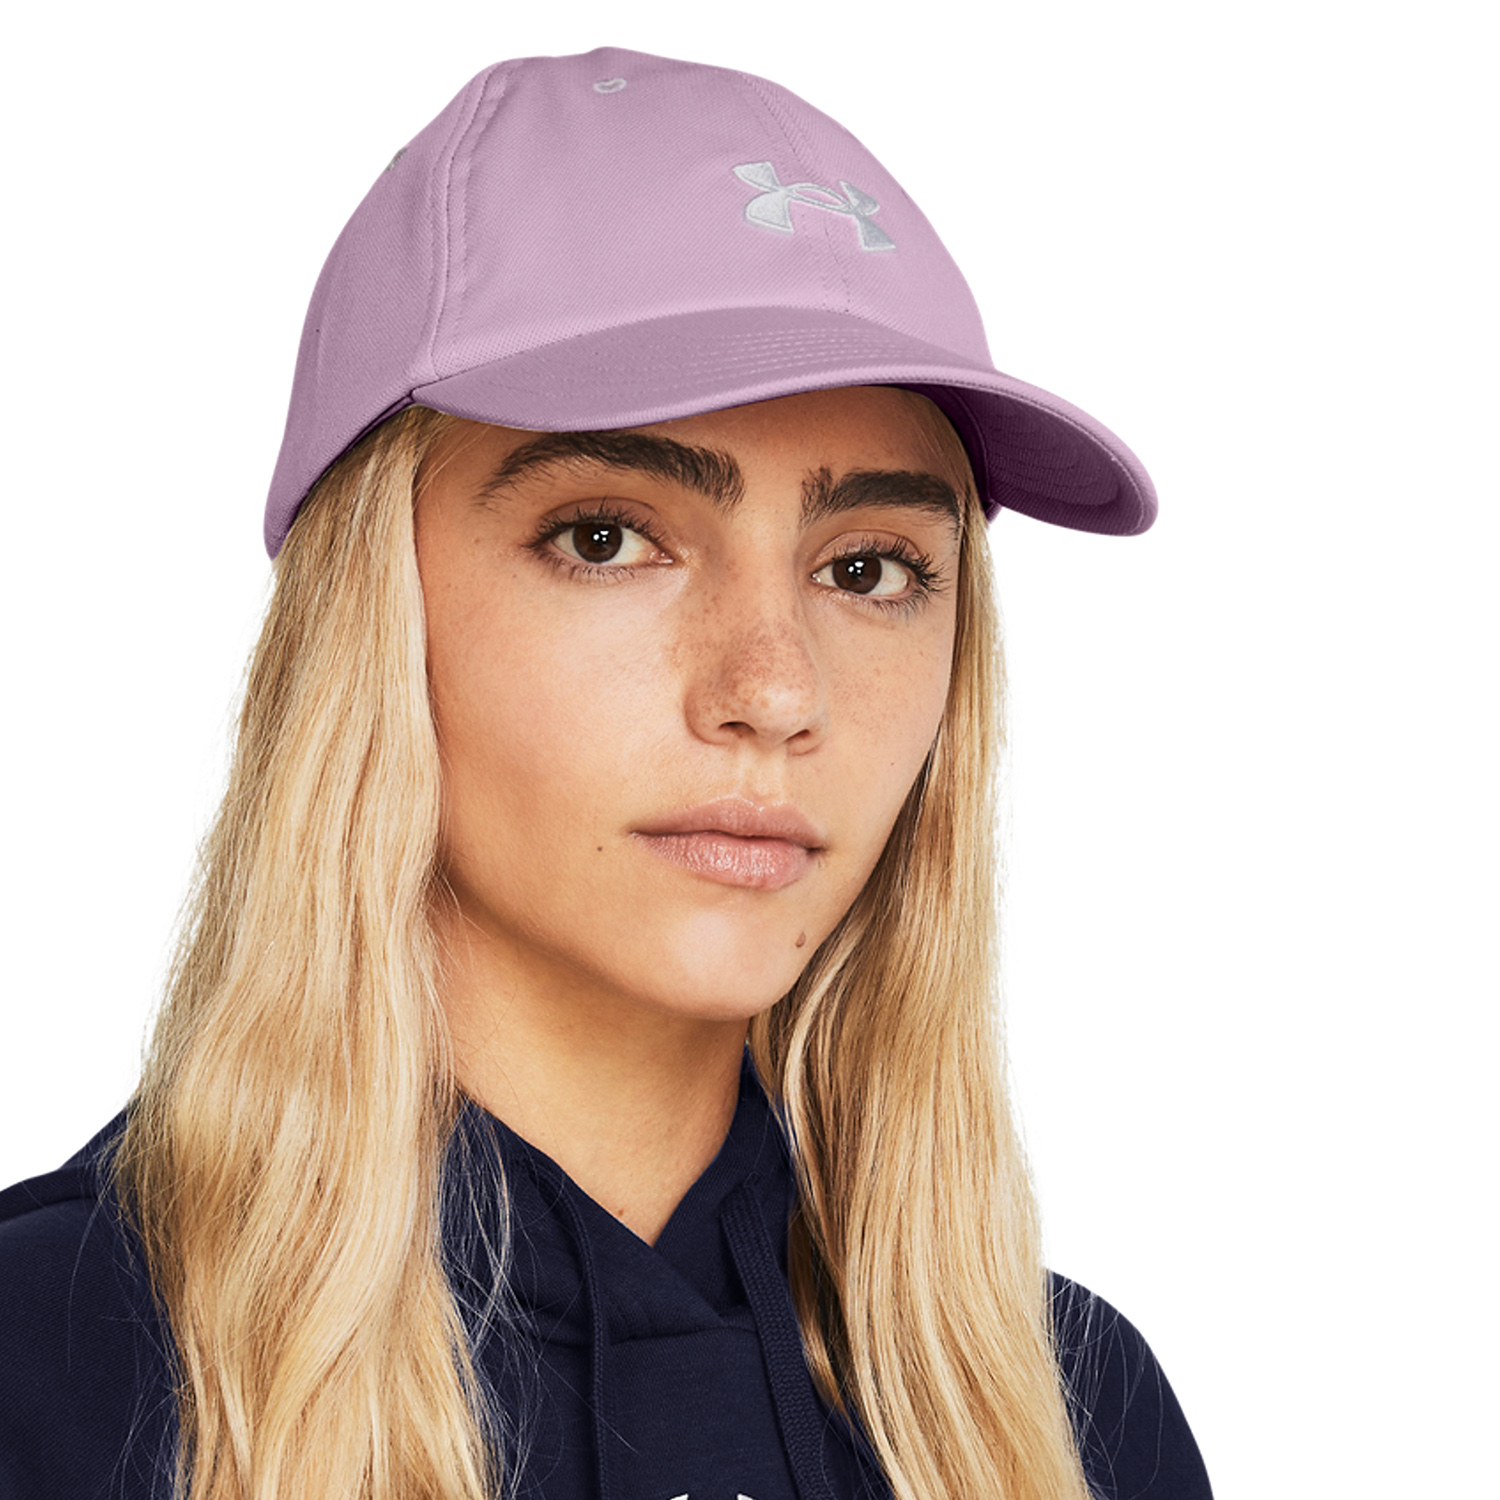 Under Armour Blitzing Gorra Mujer - Purple Ace/White